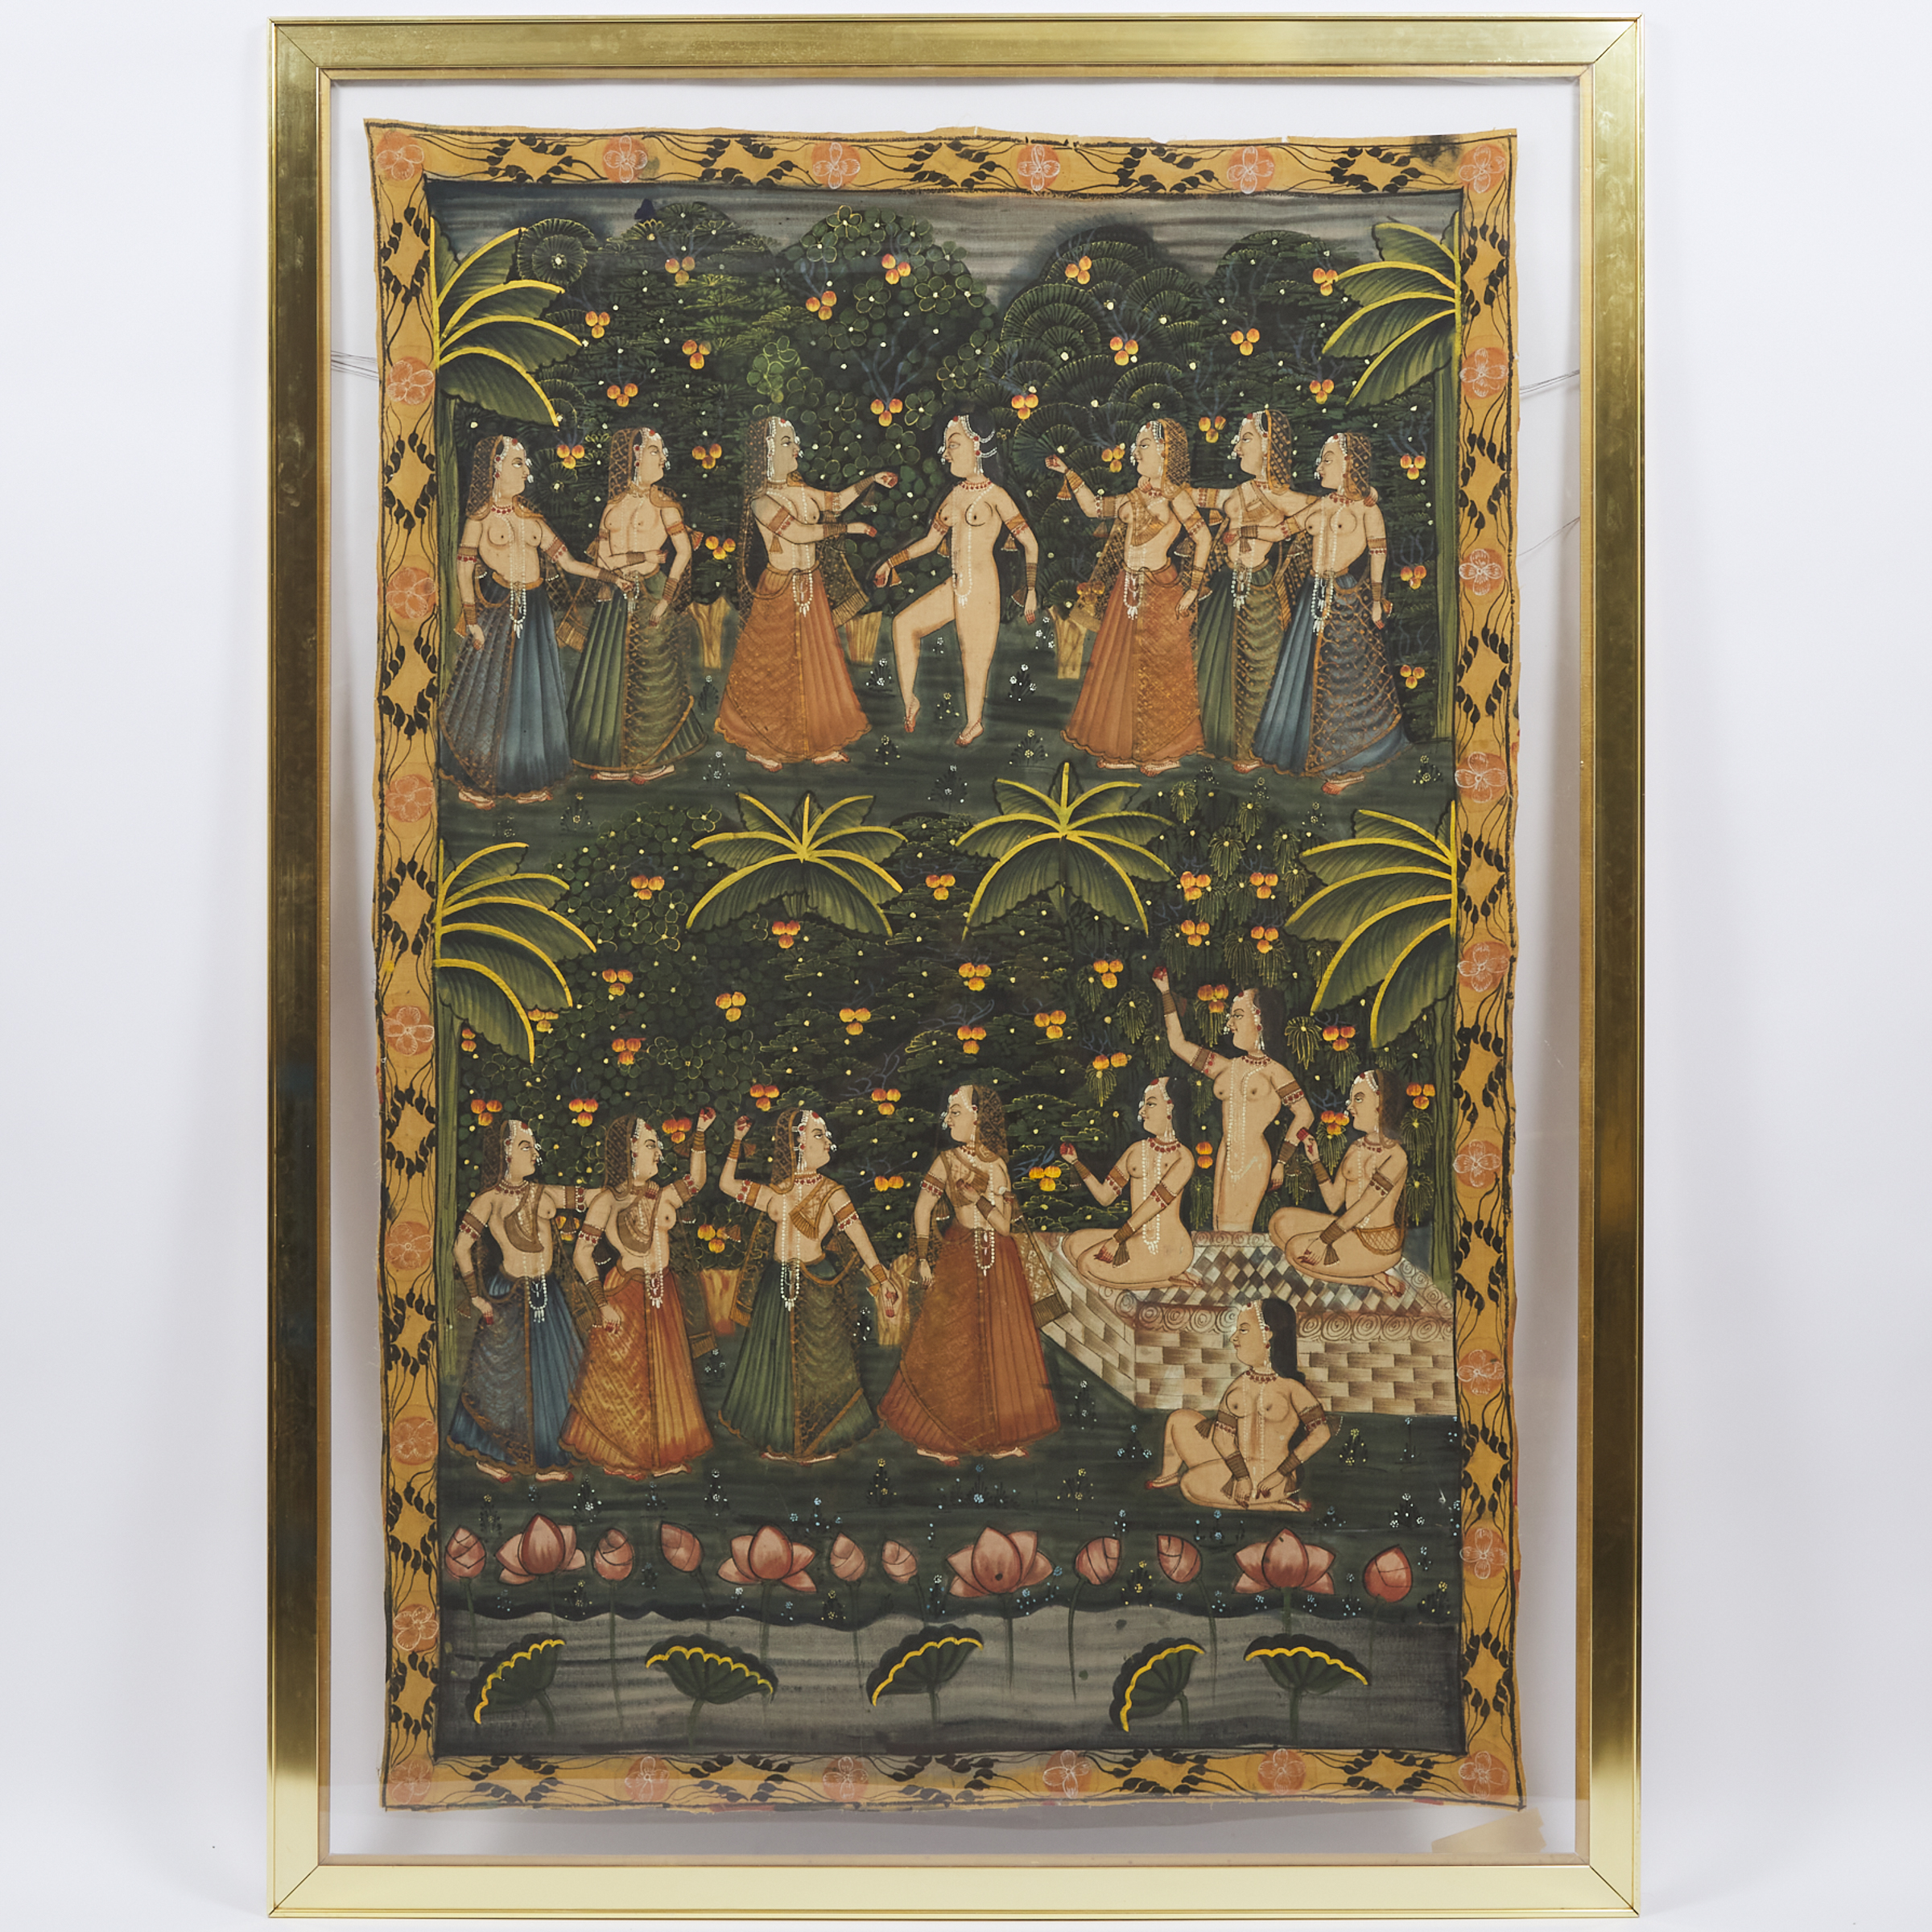 A Large Indian Pichwai/Picchvai of Gopis,